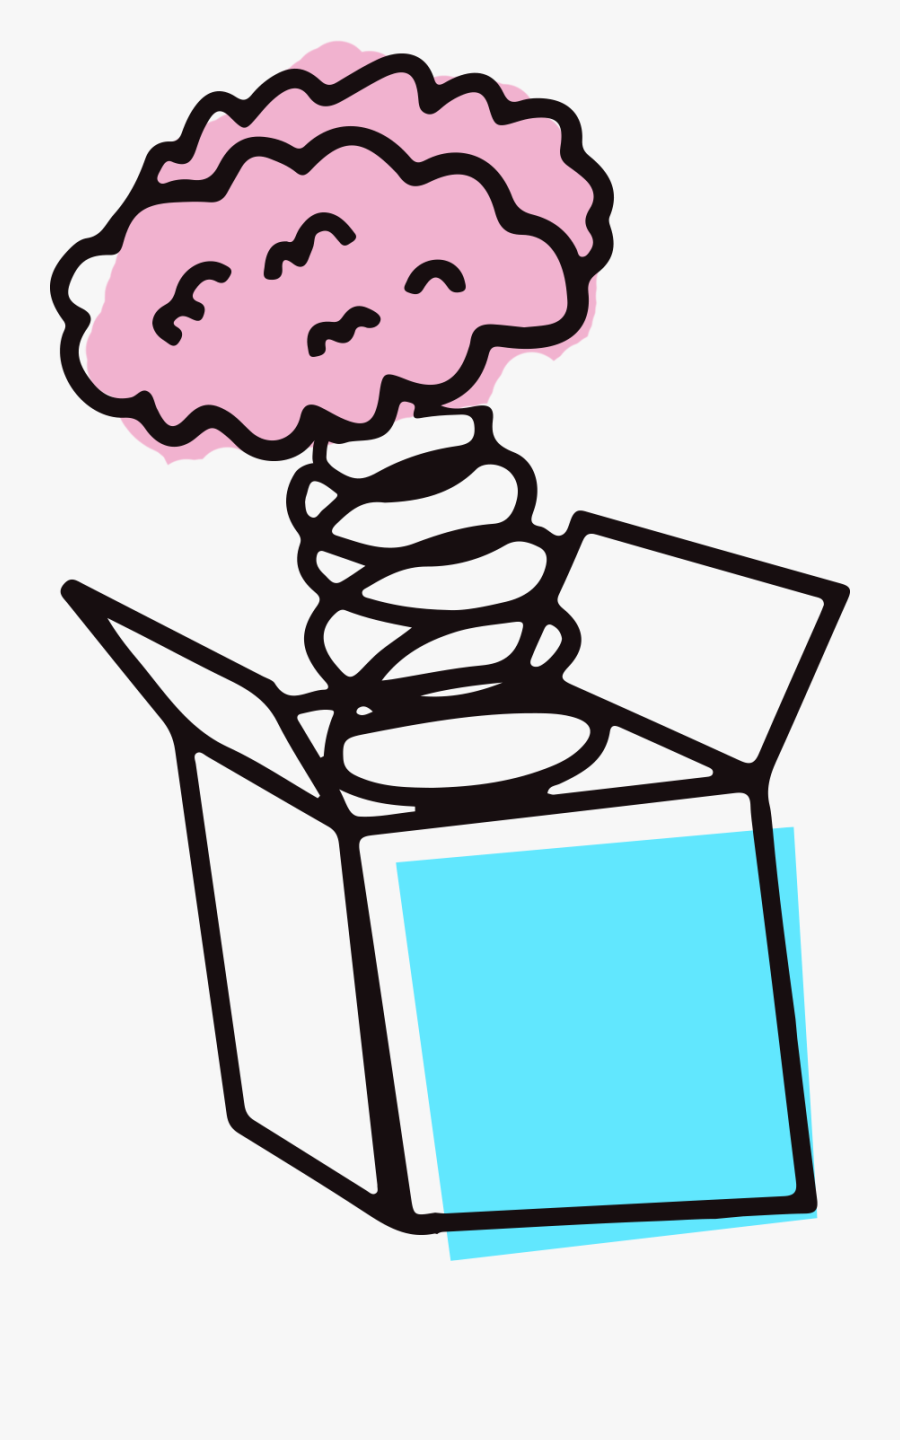 Illustration Of A Cute Brain Popping Out Of A Jack, Transparent Clipart